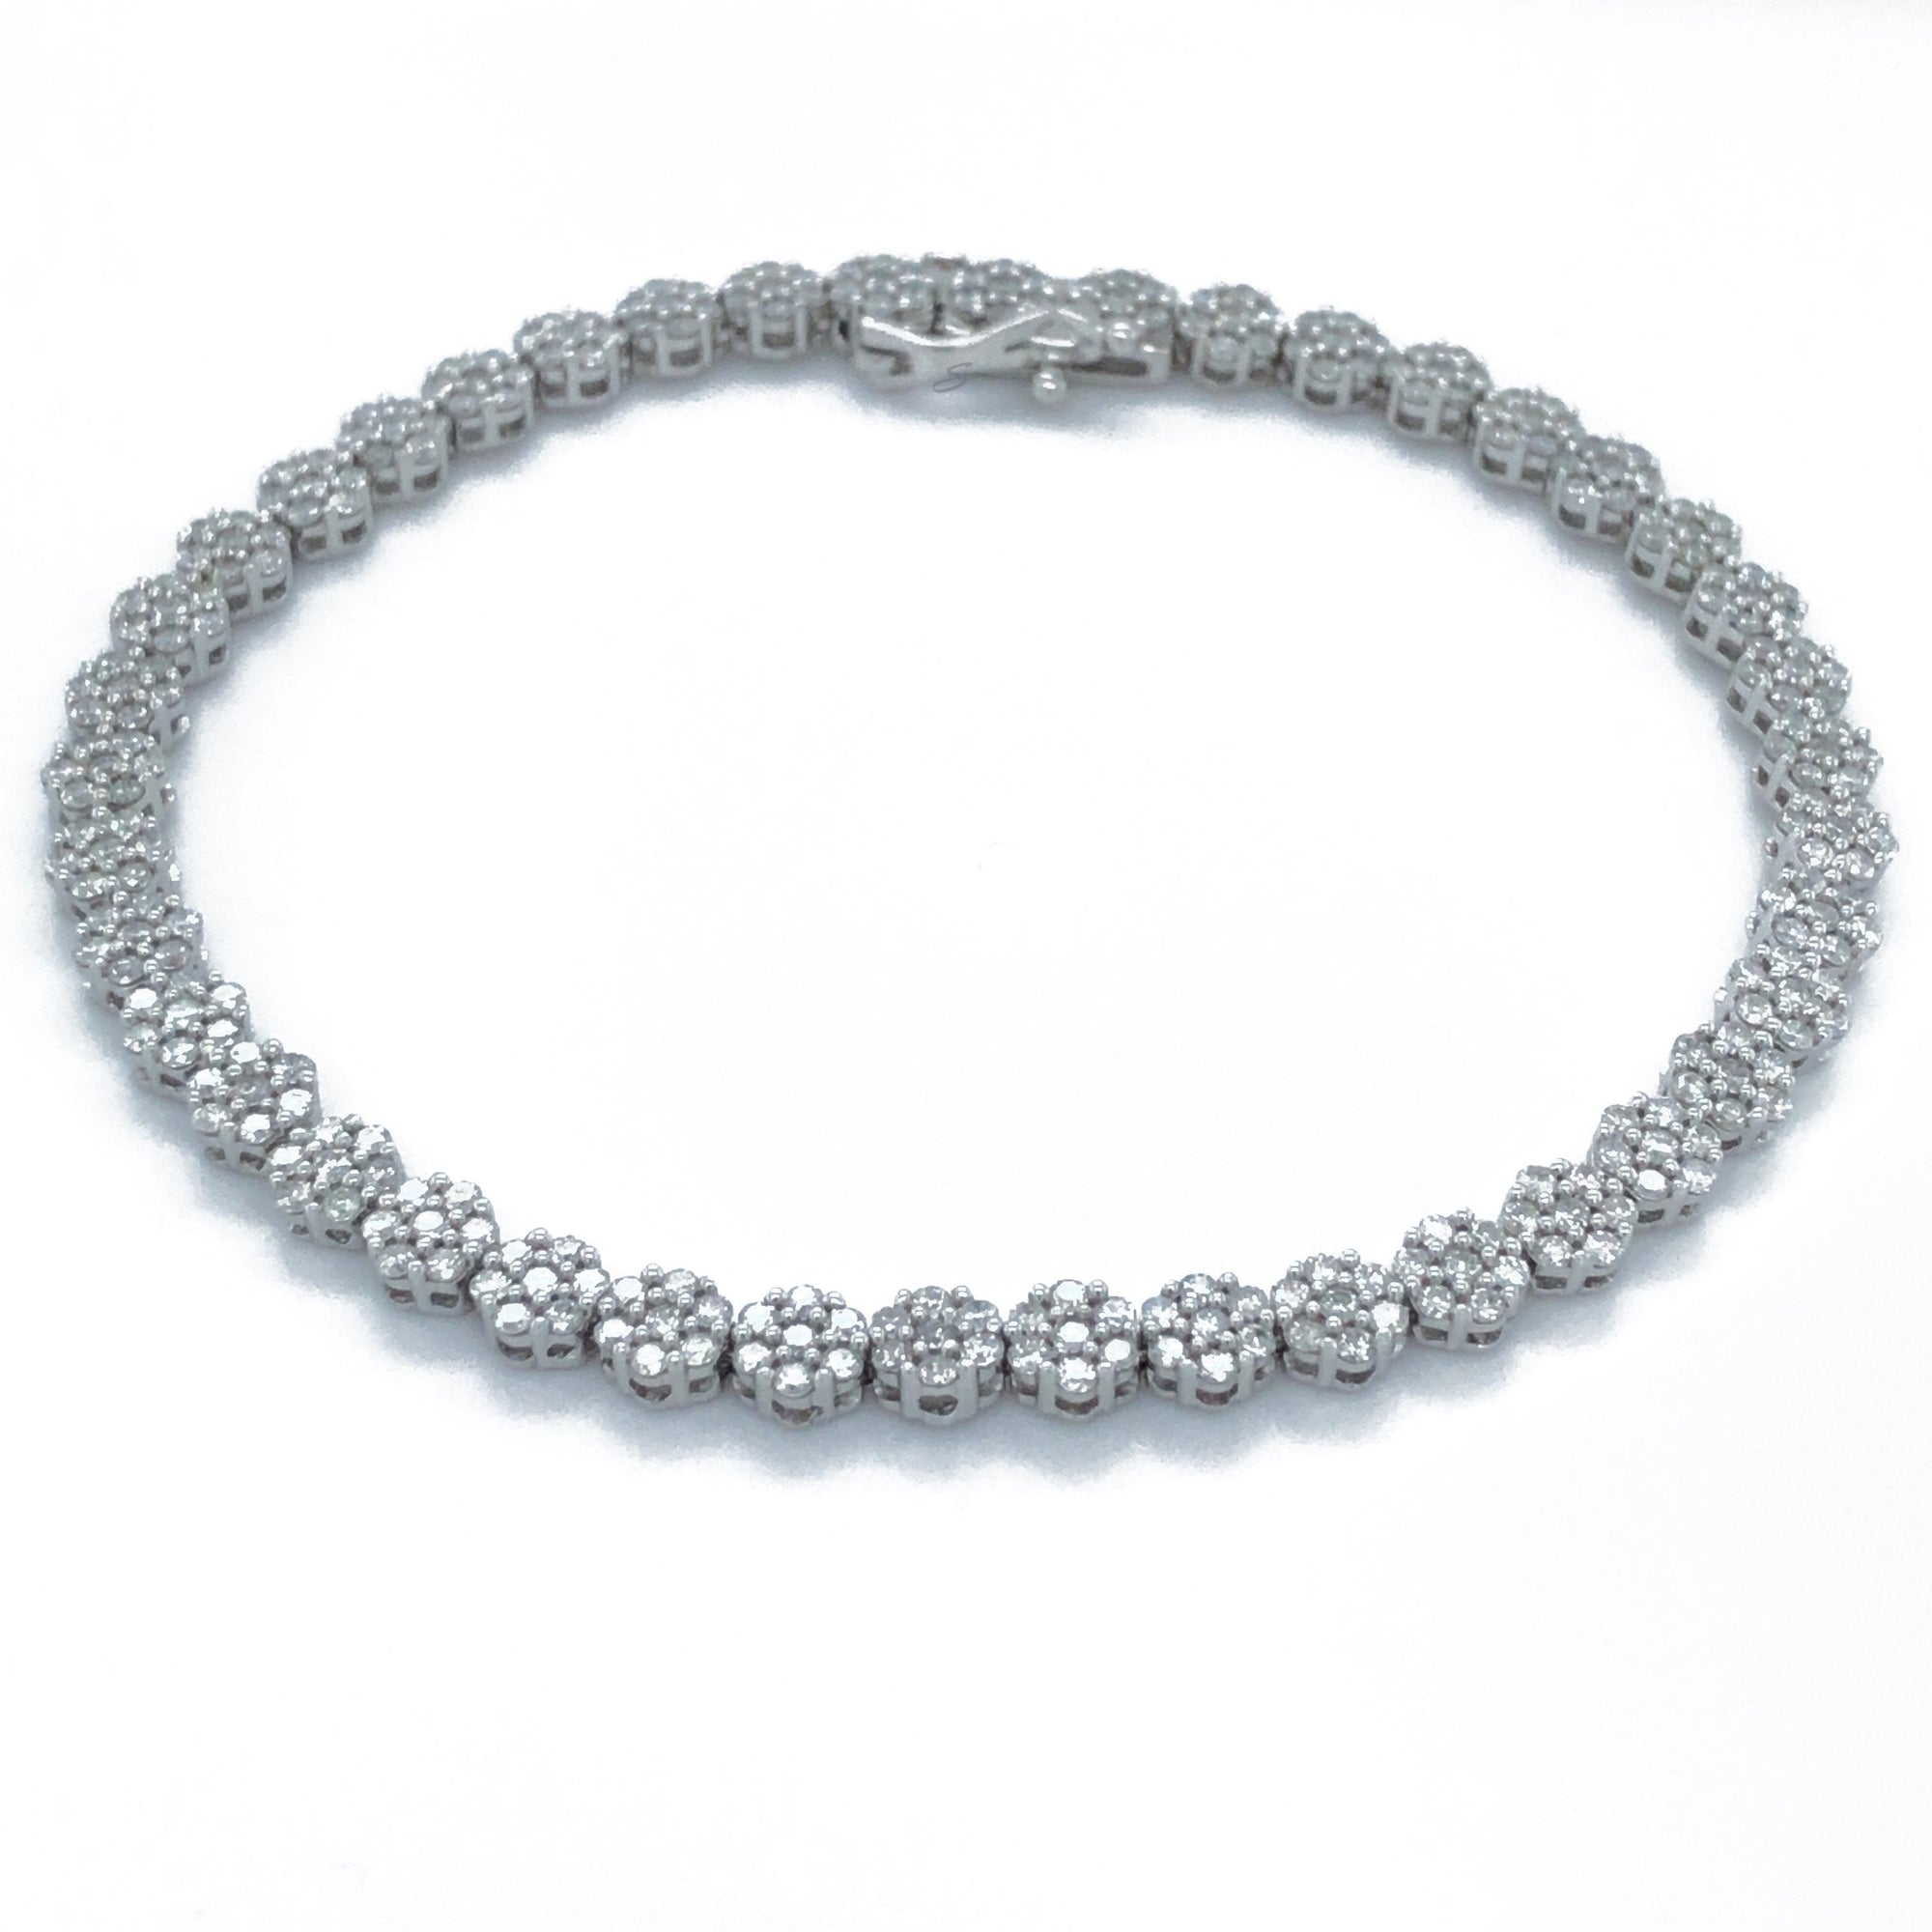 Diamond tennis bracelet set in white gold illusion setting. Available now.  | Beautiful jewelry, Tennis bracelet diamond, Bracelets